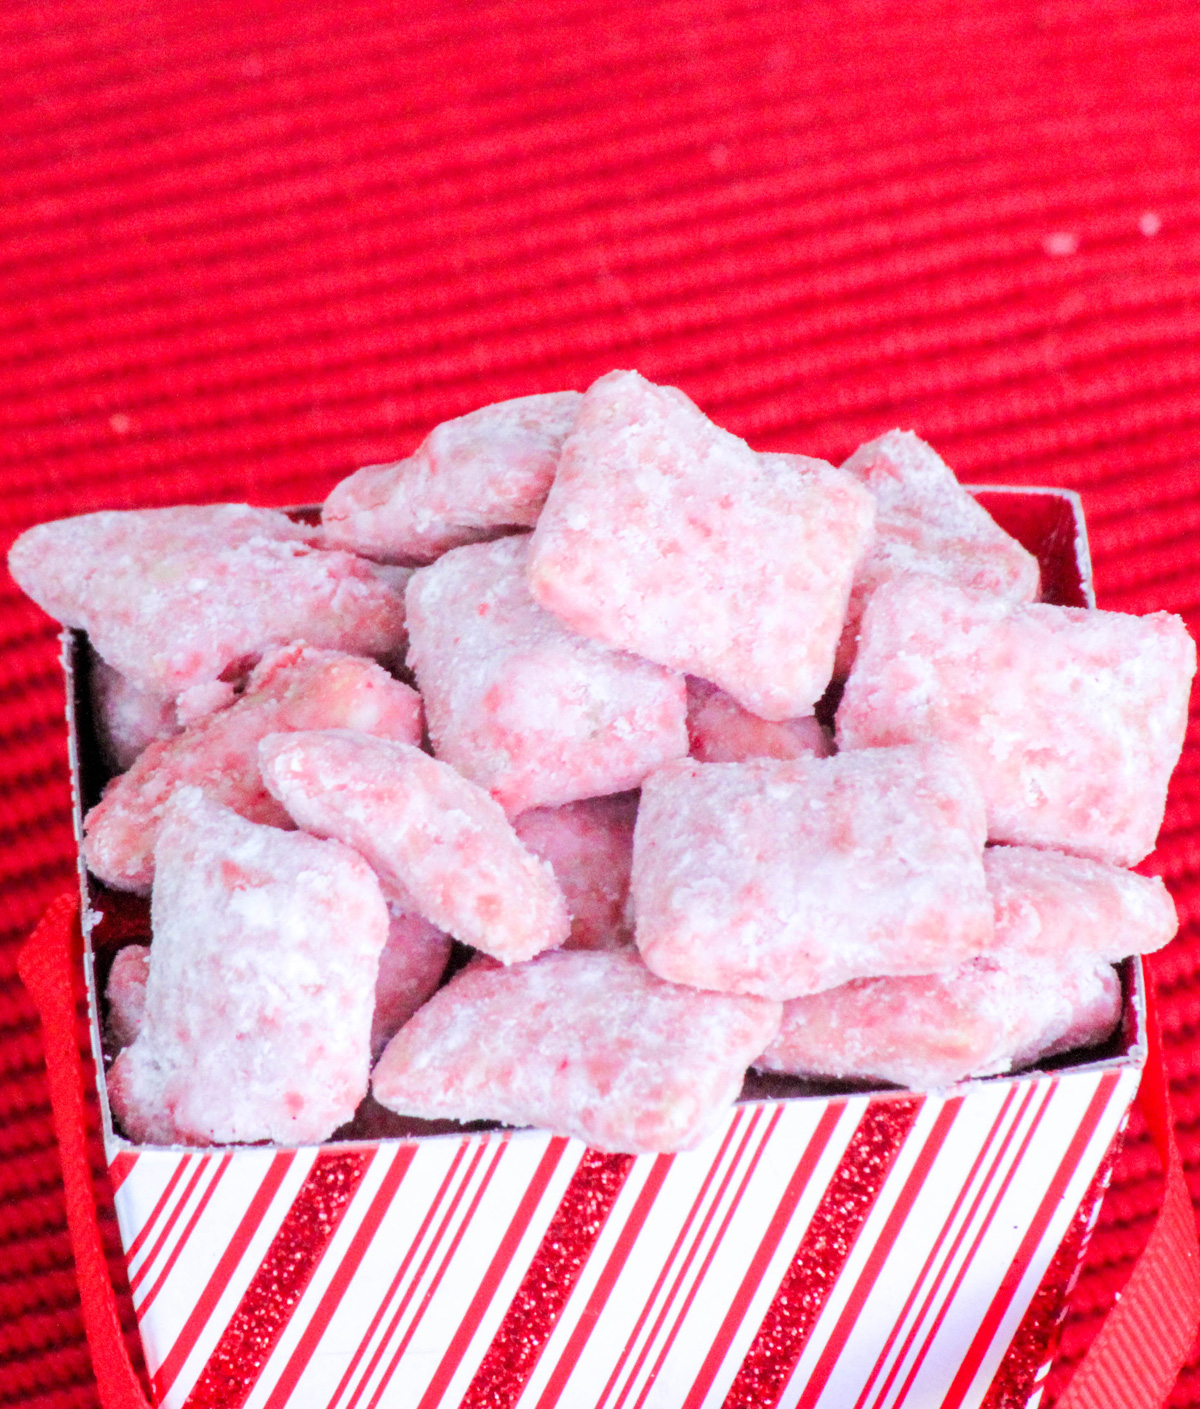 Candy Cane Peppermint Puppy Chow